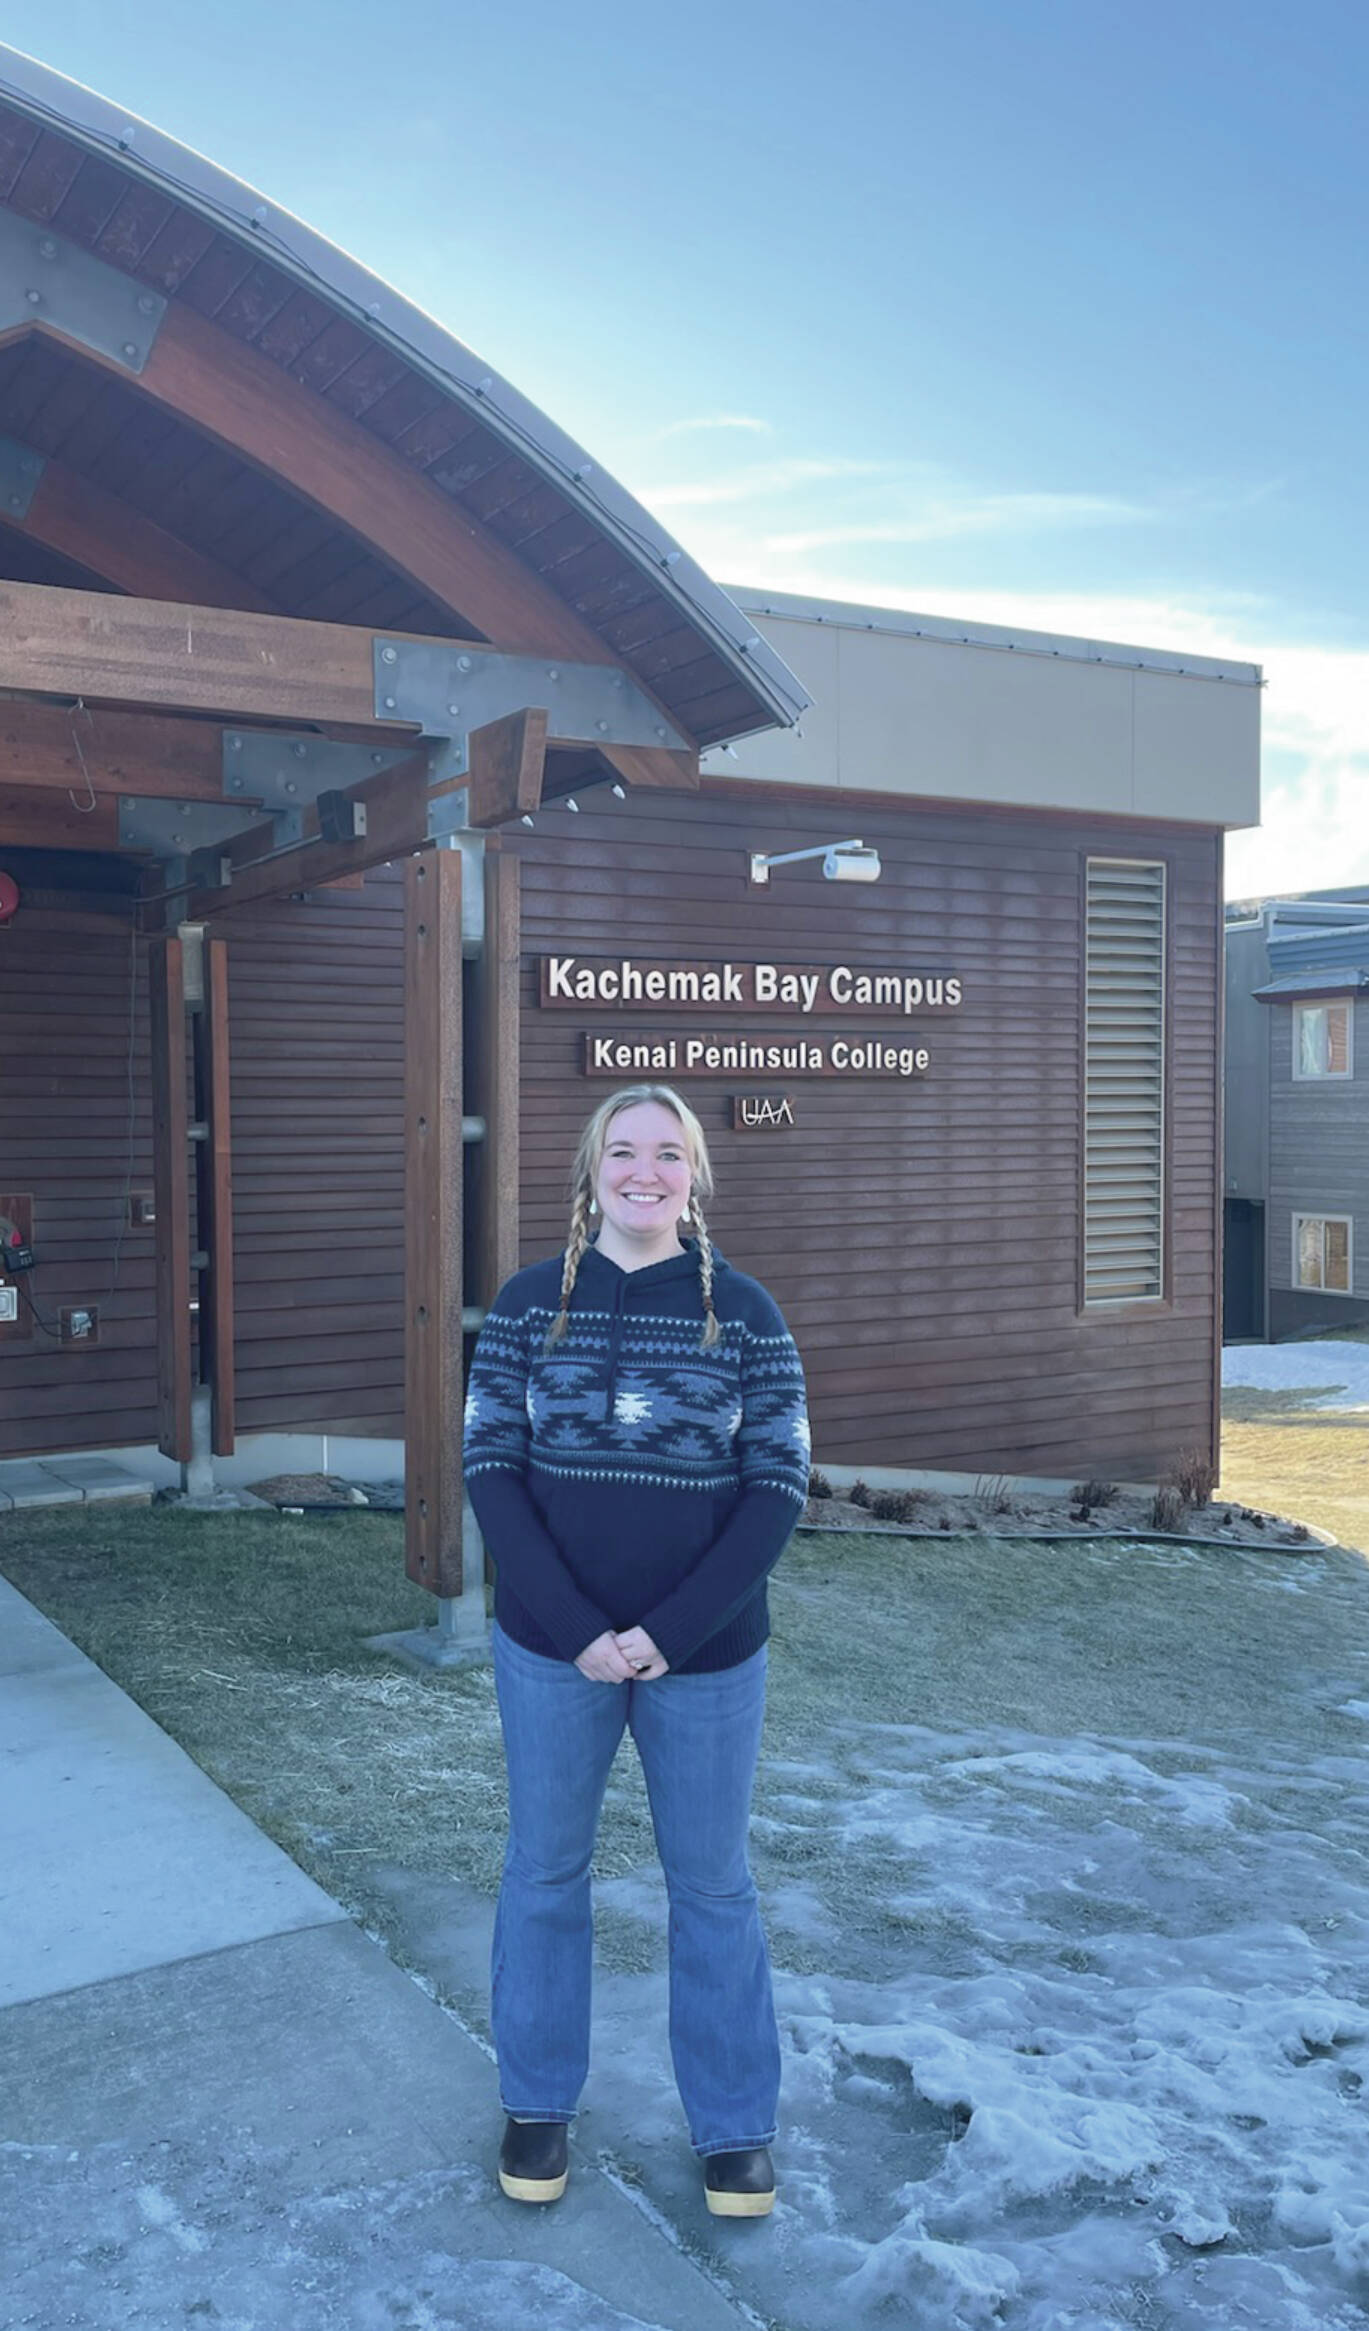 Sara Wilhelm, a 2020 Semester by the Bay alumni and current lab technician stands outside of Pioneer Hall at Kachemak Bay Campus on Jan. 25. (Emilie Springer/Homer News)